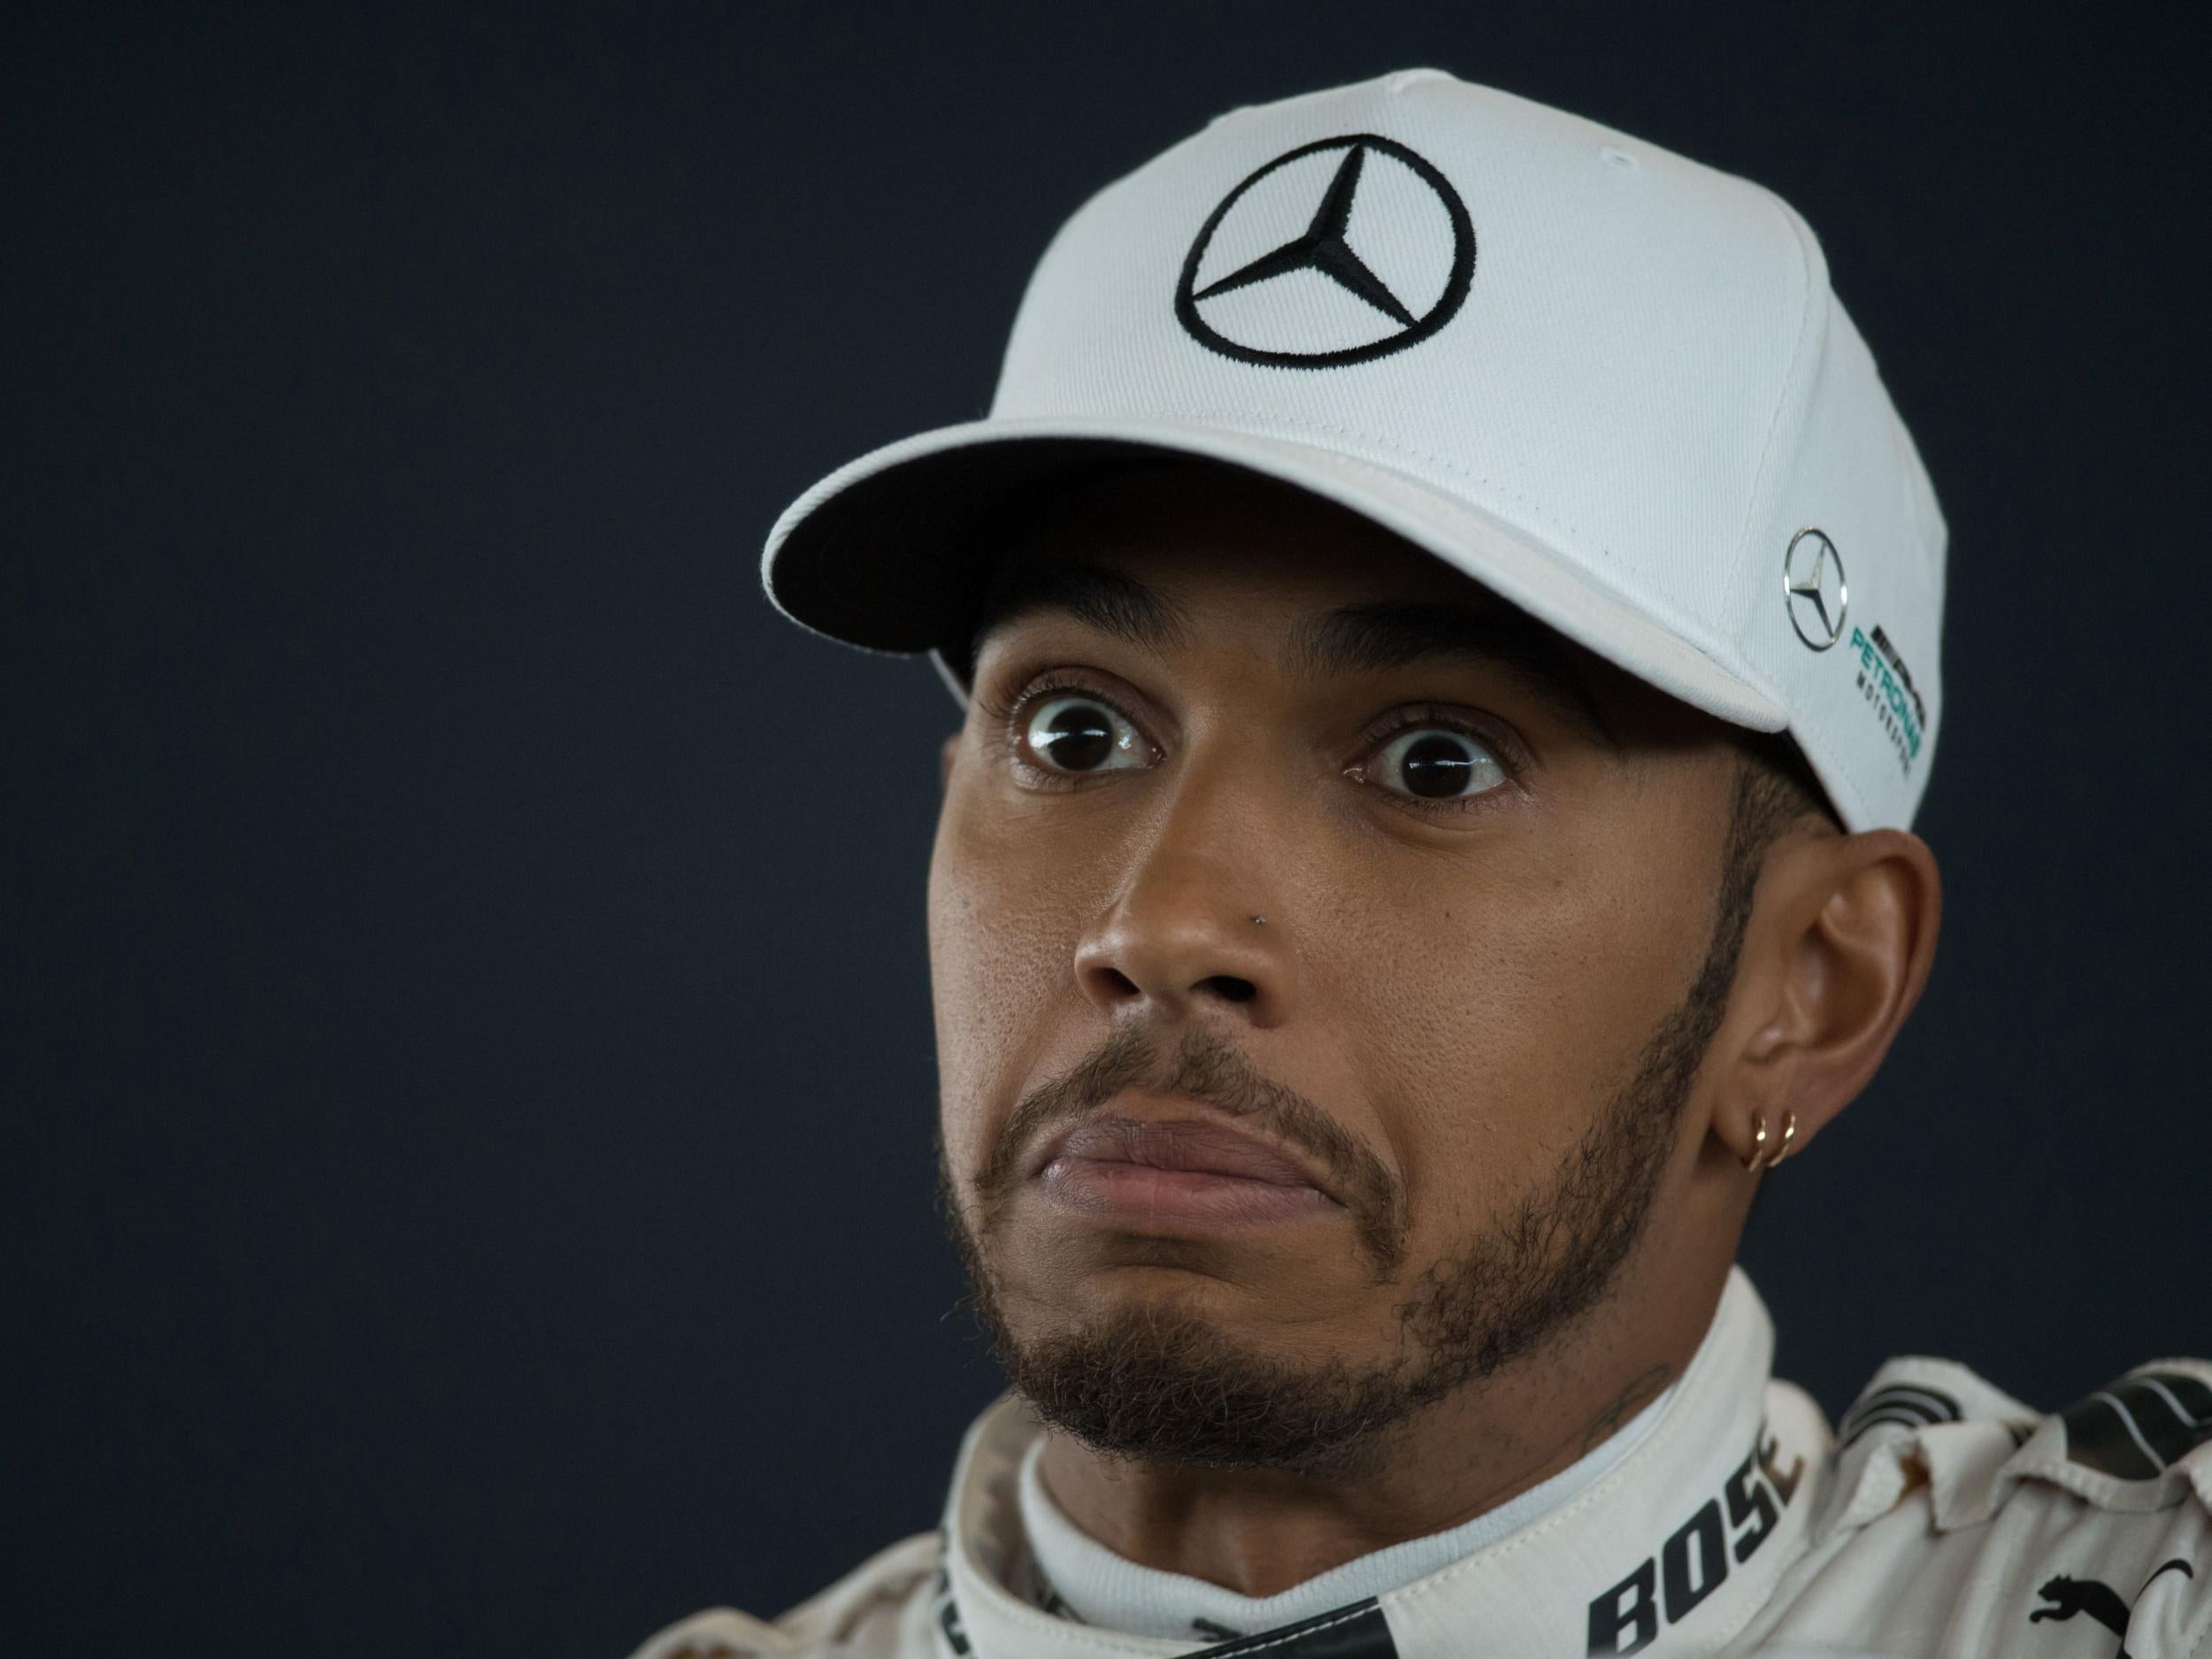 Hamilton is aiming to win his fourth World Championship this year